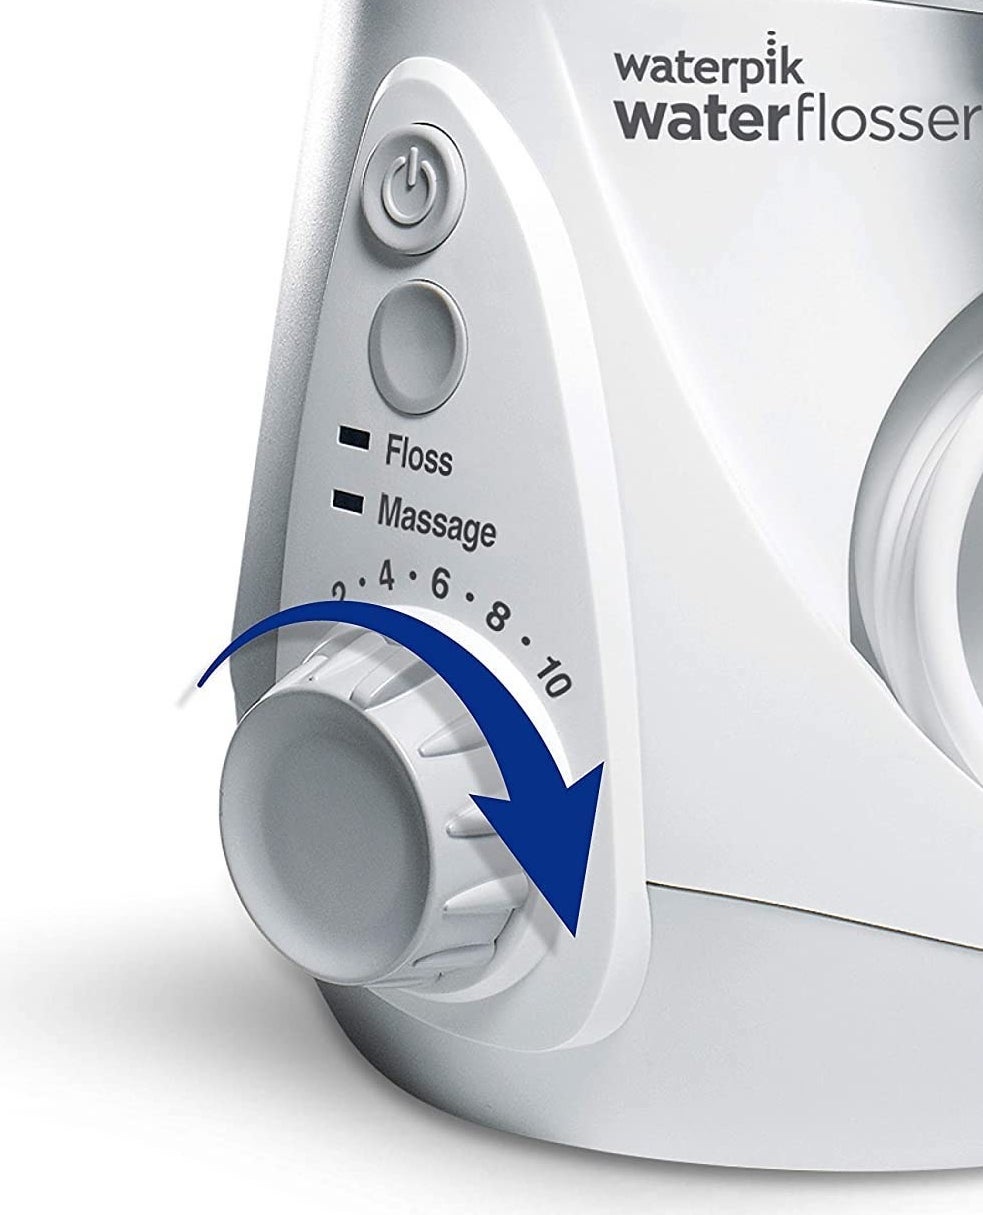 A close up of the flosser&#x27;s knob that show the pressure settings and modes